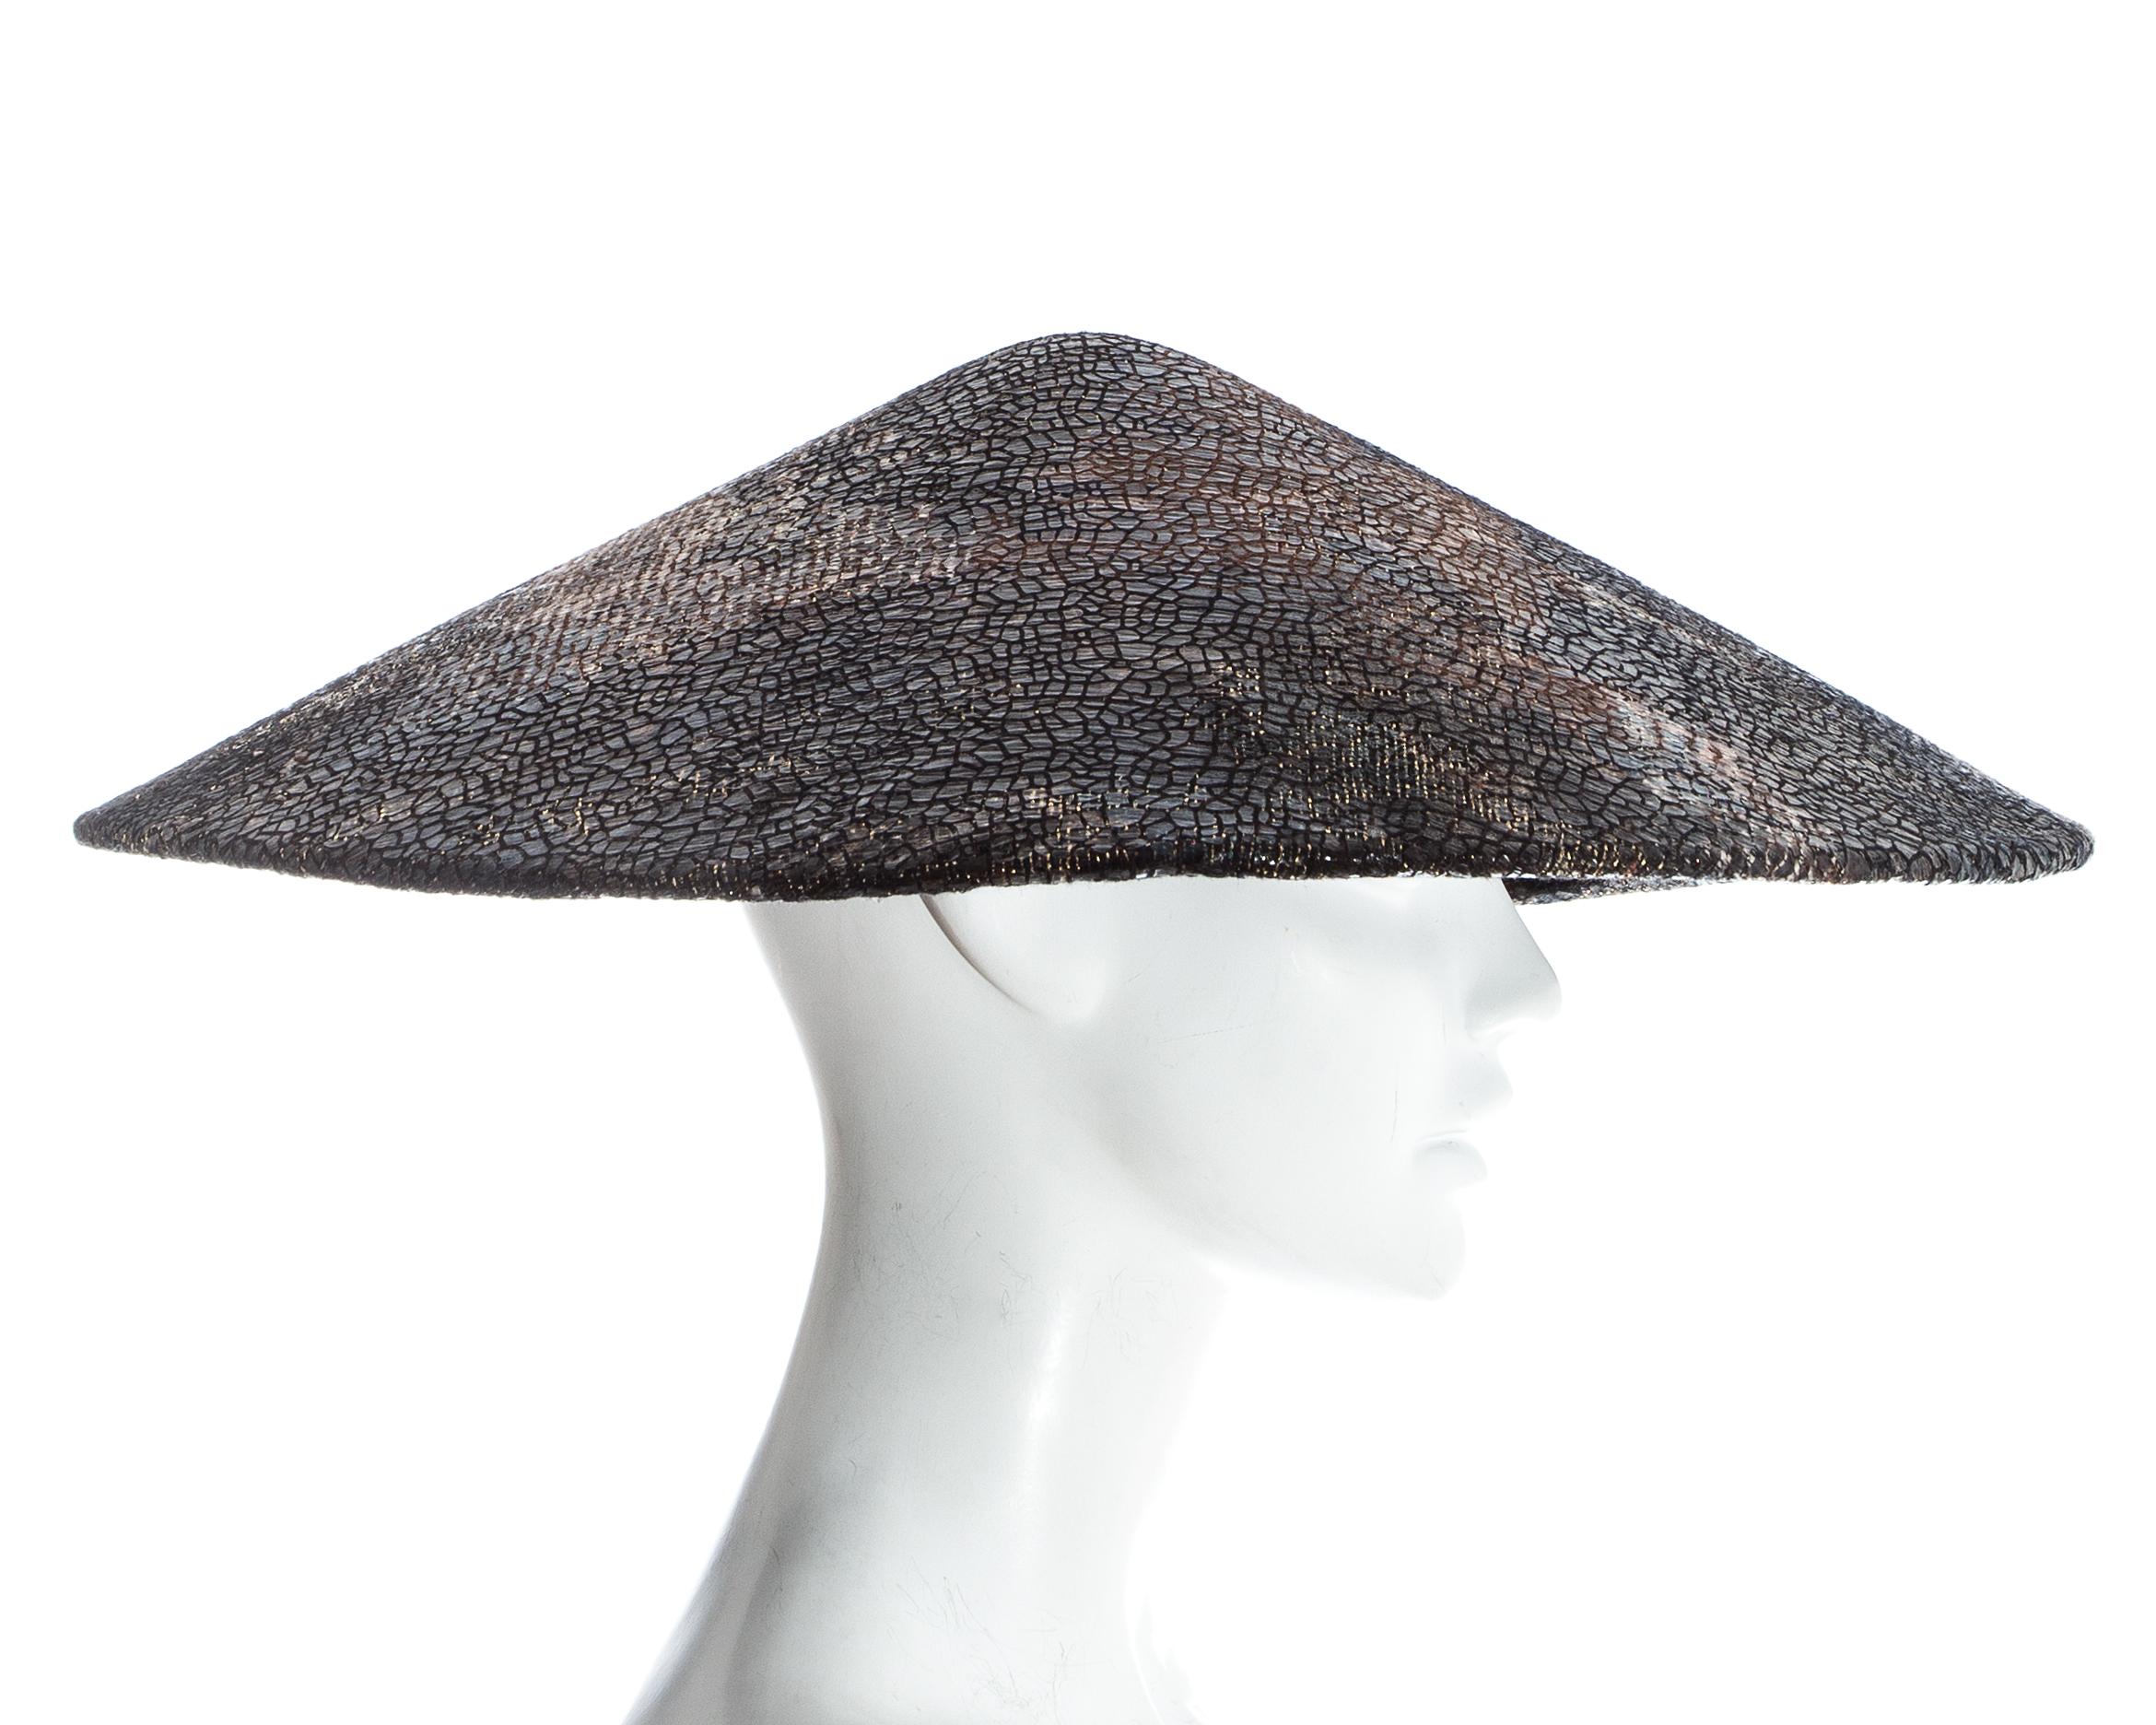 Chanel by Karl Lagerfeld, 'Paris-Shangai' bronze sequin conical hat, pf 2010 For Sale 1